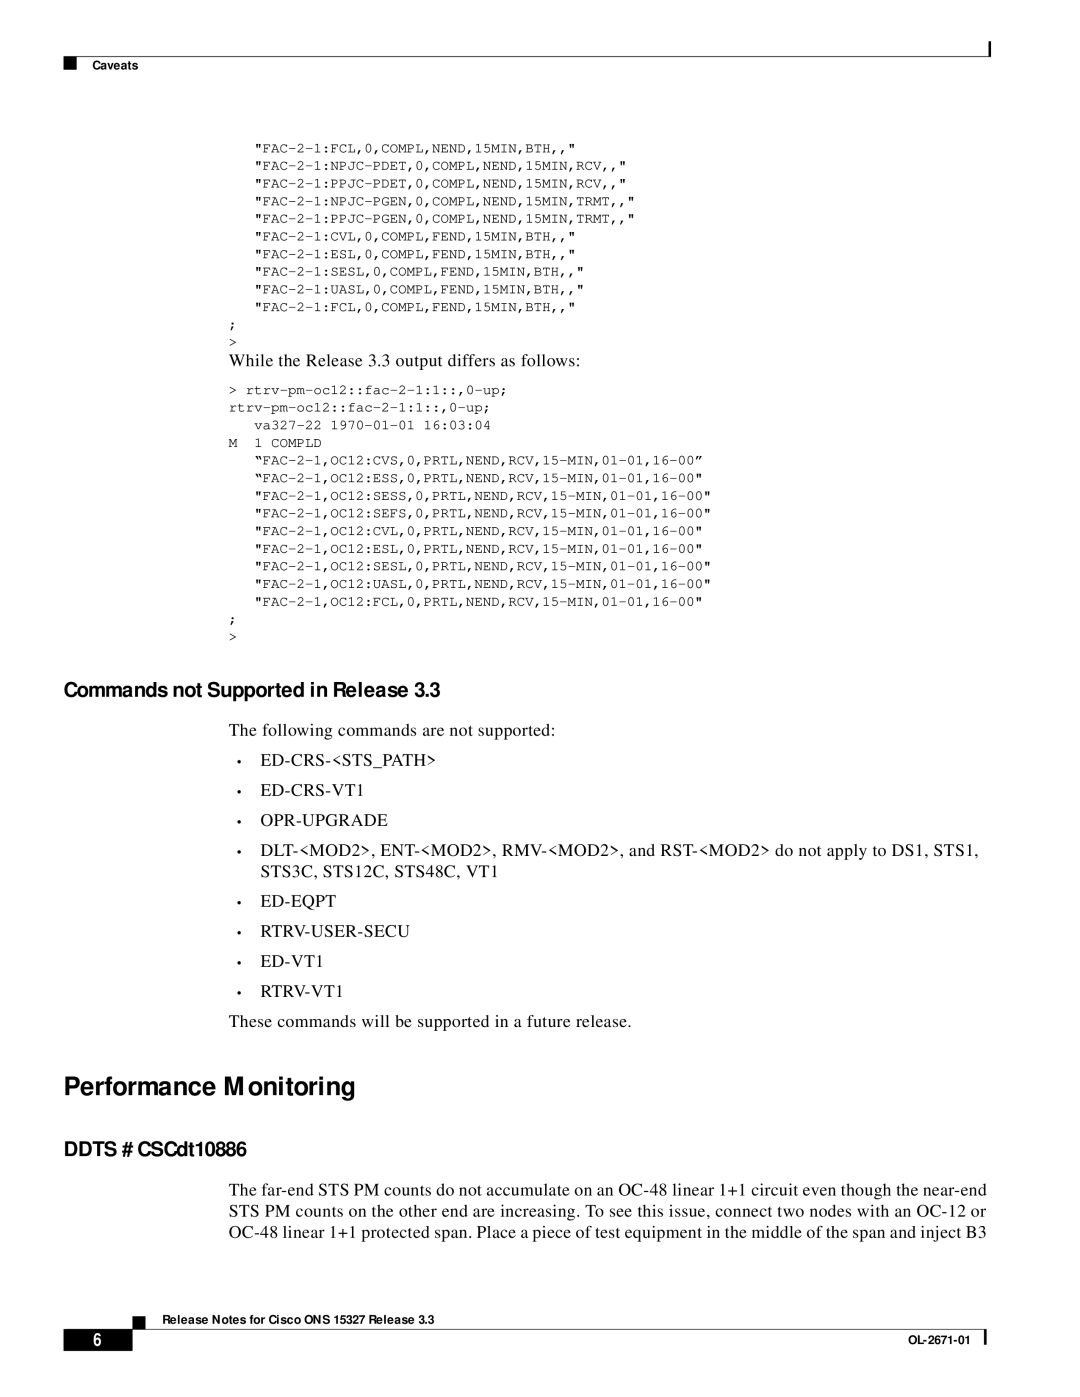 Cisco Systems ONS 15327 manual Performance Monitoring, Commands not Supported in Release, DDTS # CSCdt10886 